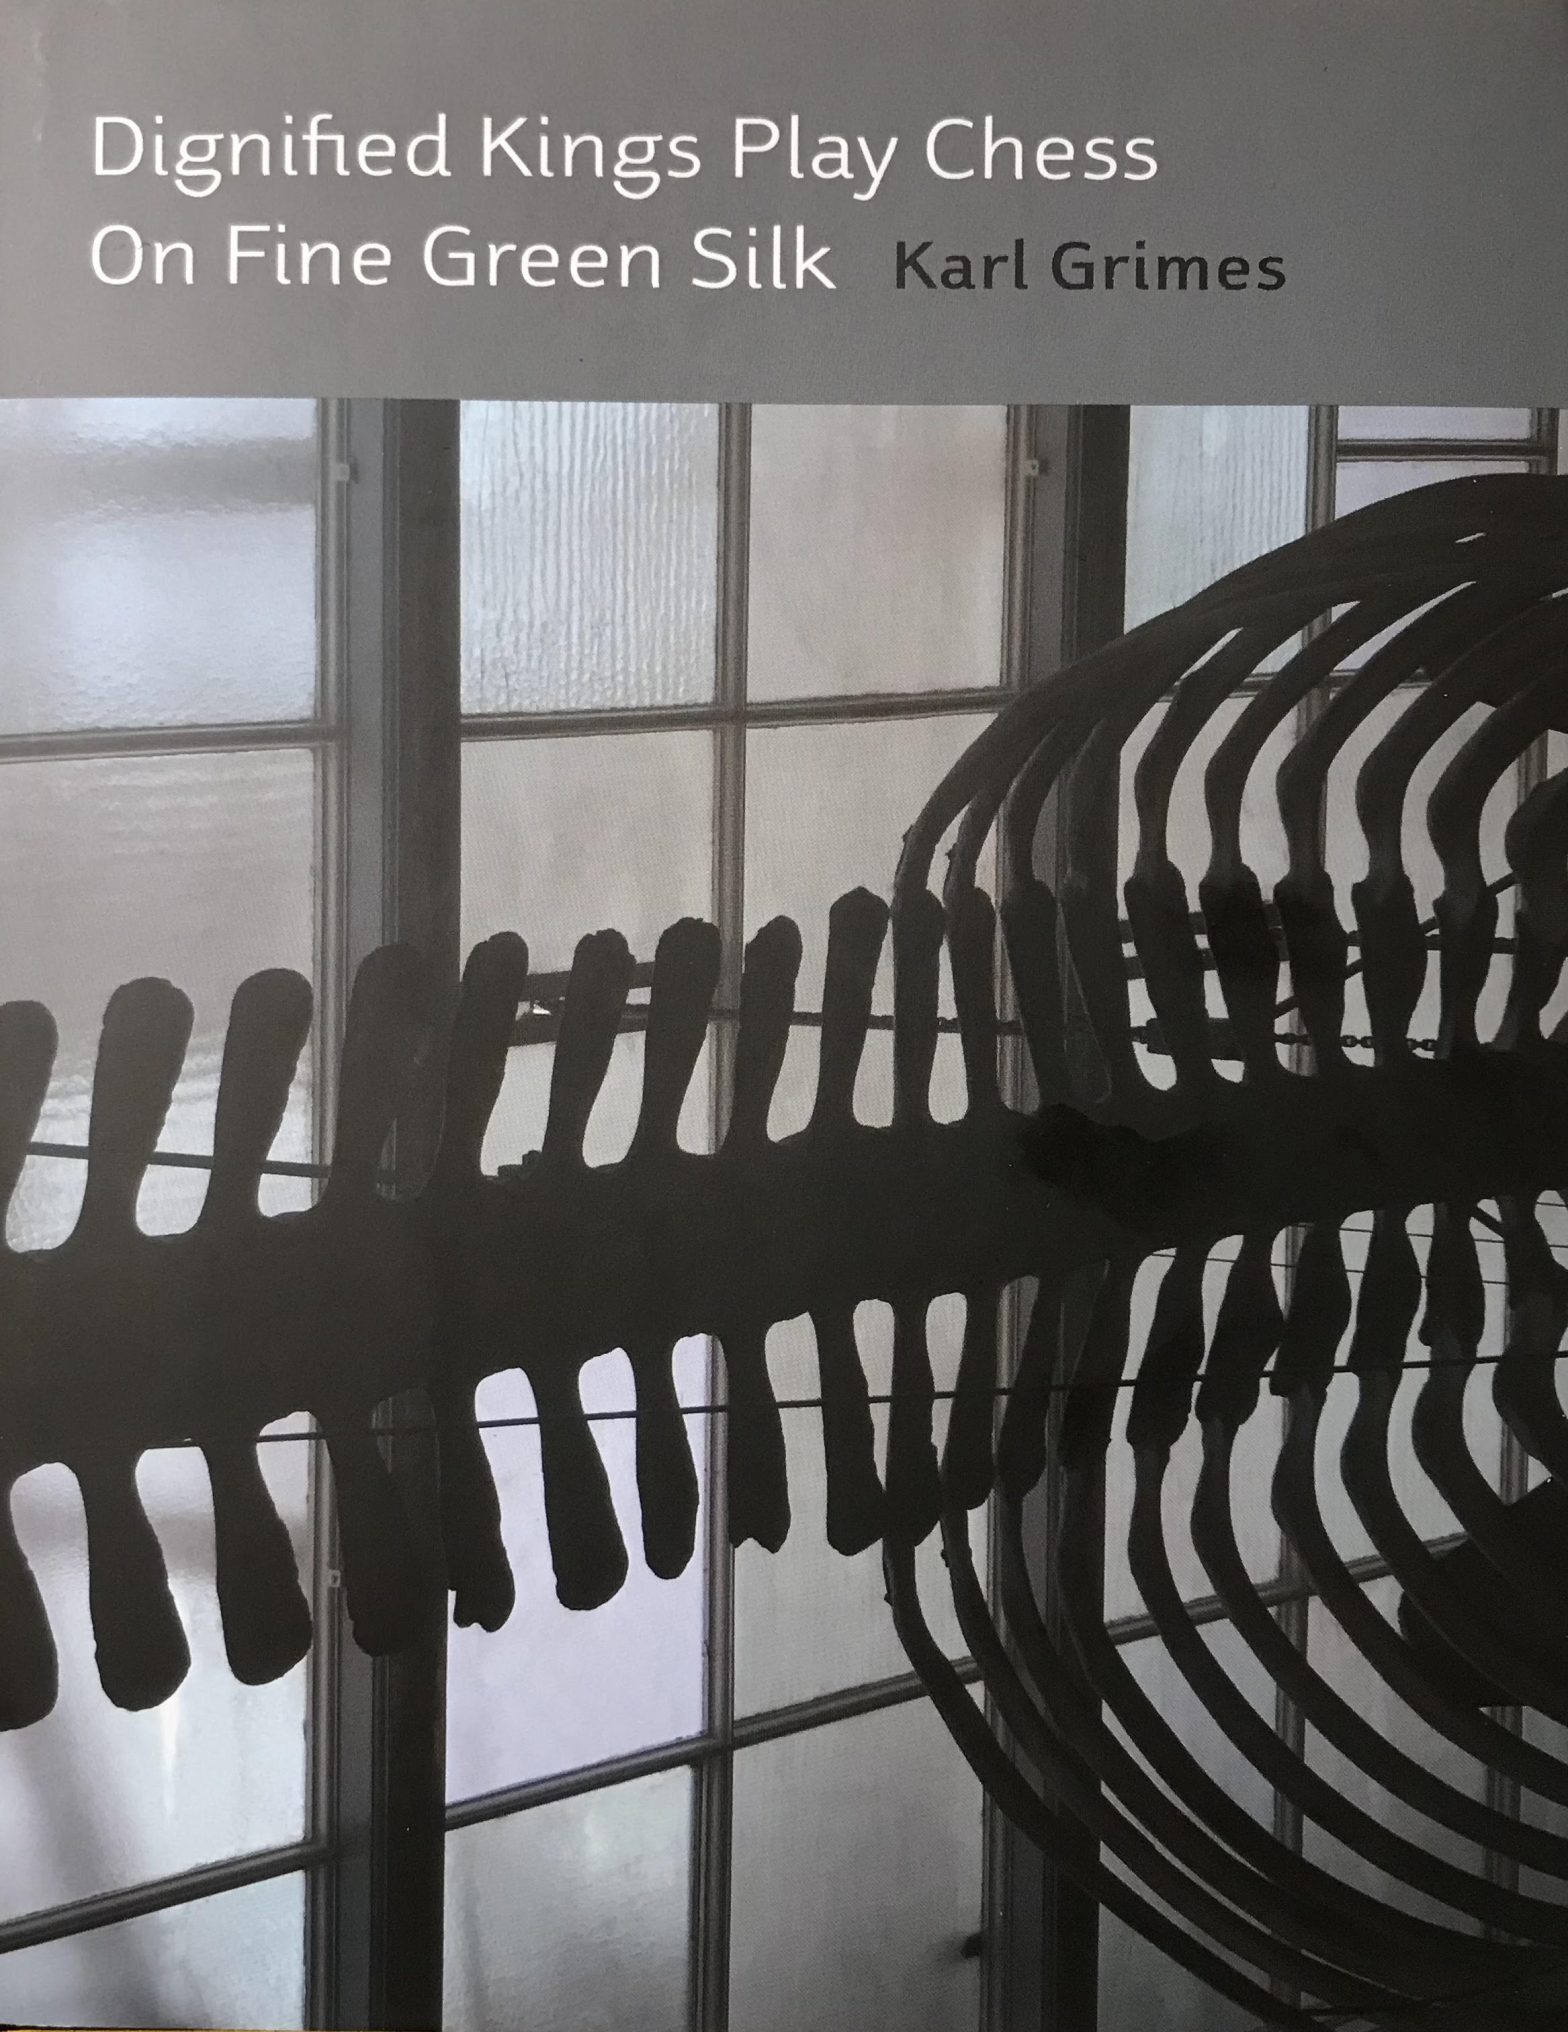 Dignified Kings Play Chess on Fine Green Silk, Karl Grimes